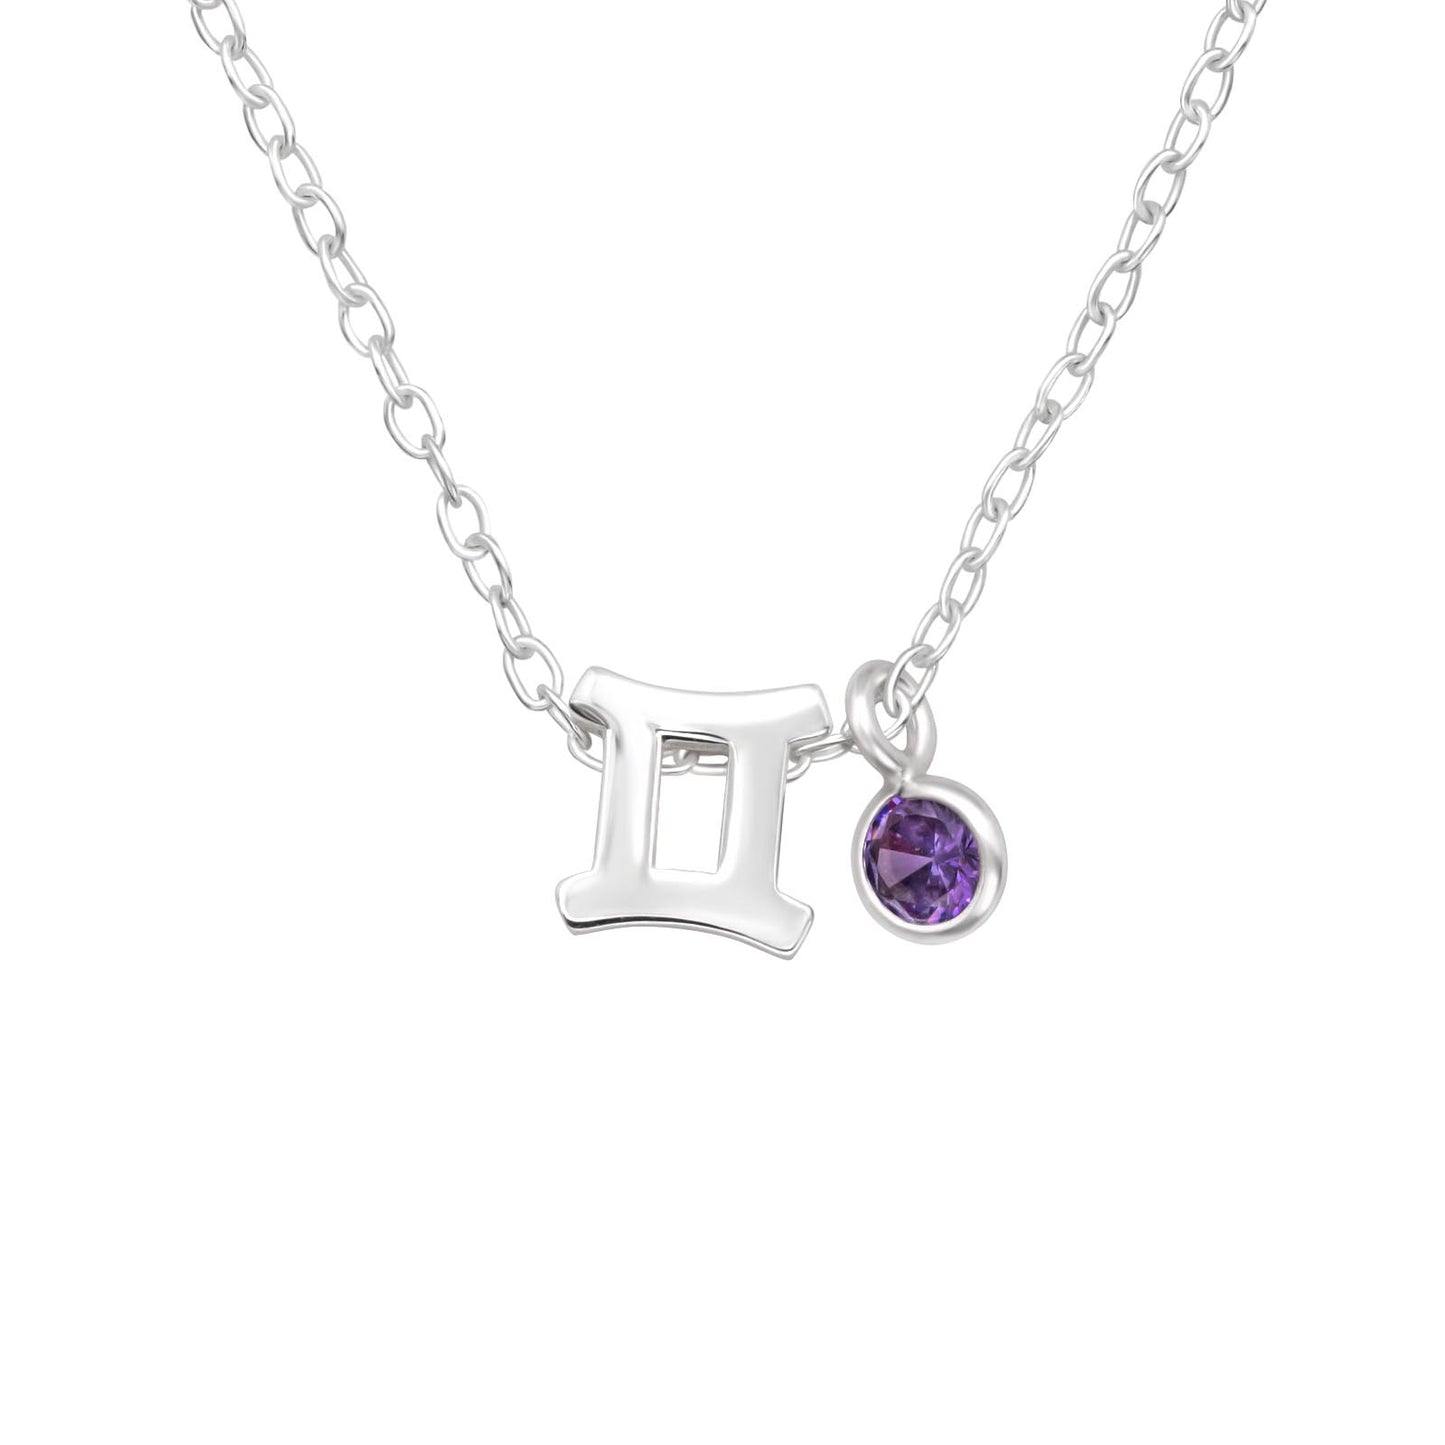 Gemini Sign Pendant Necklace - Made from Sterling Silver